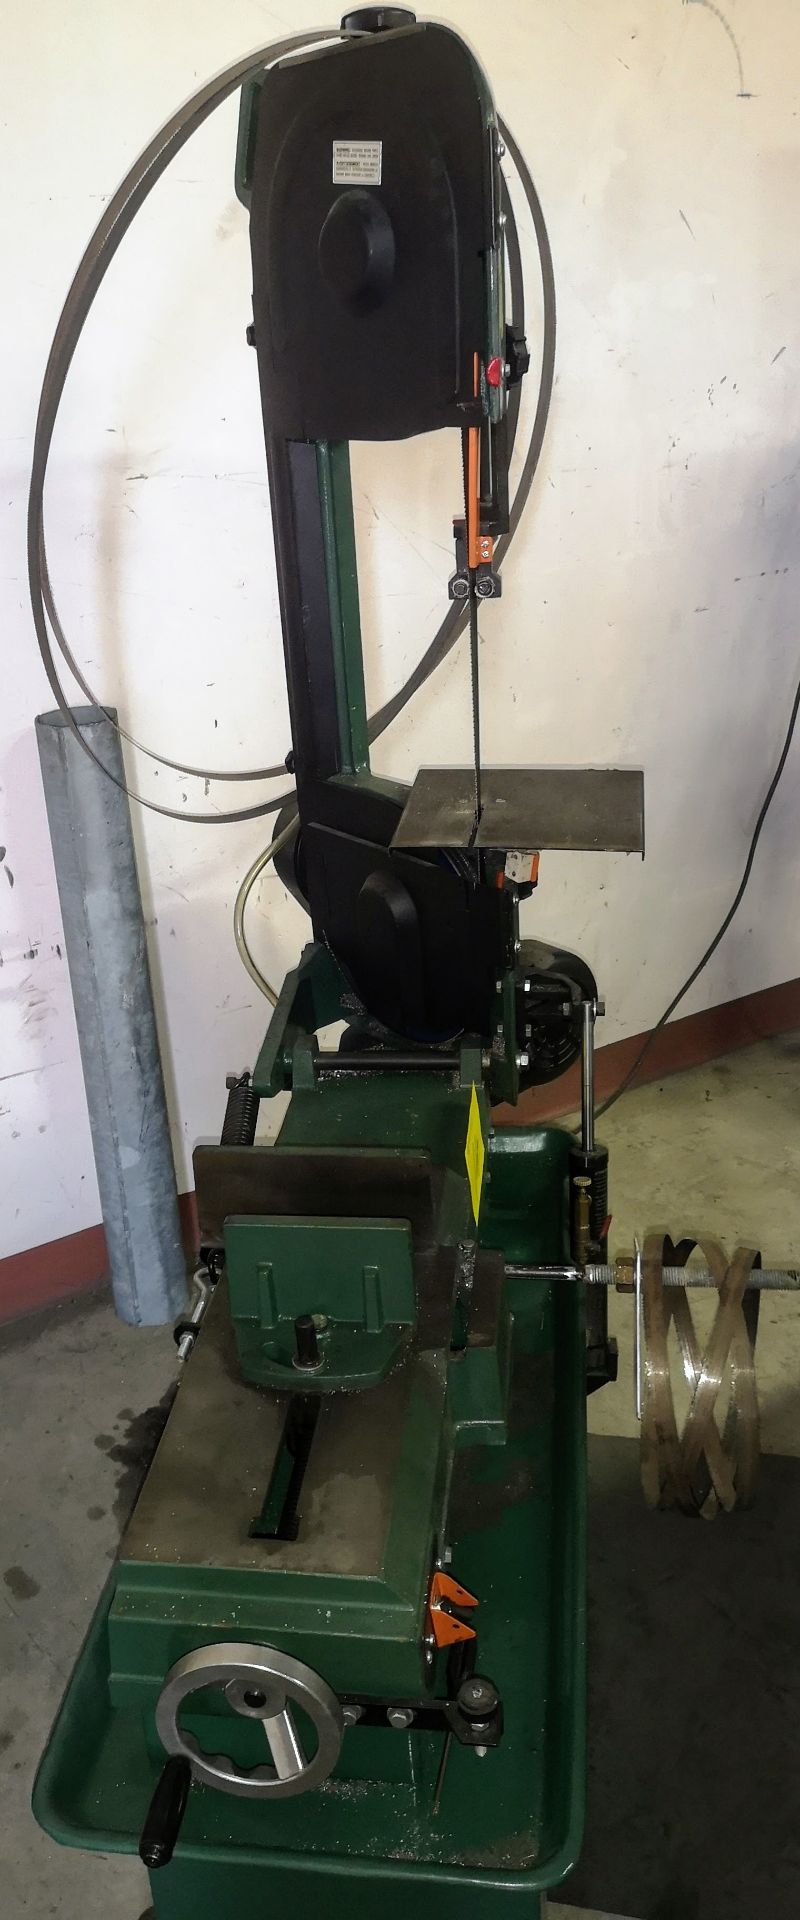 CRAFTEX 7" METAL CUTTING BANDSAW - Image 2 of 4